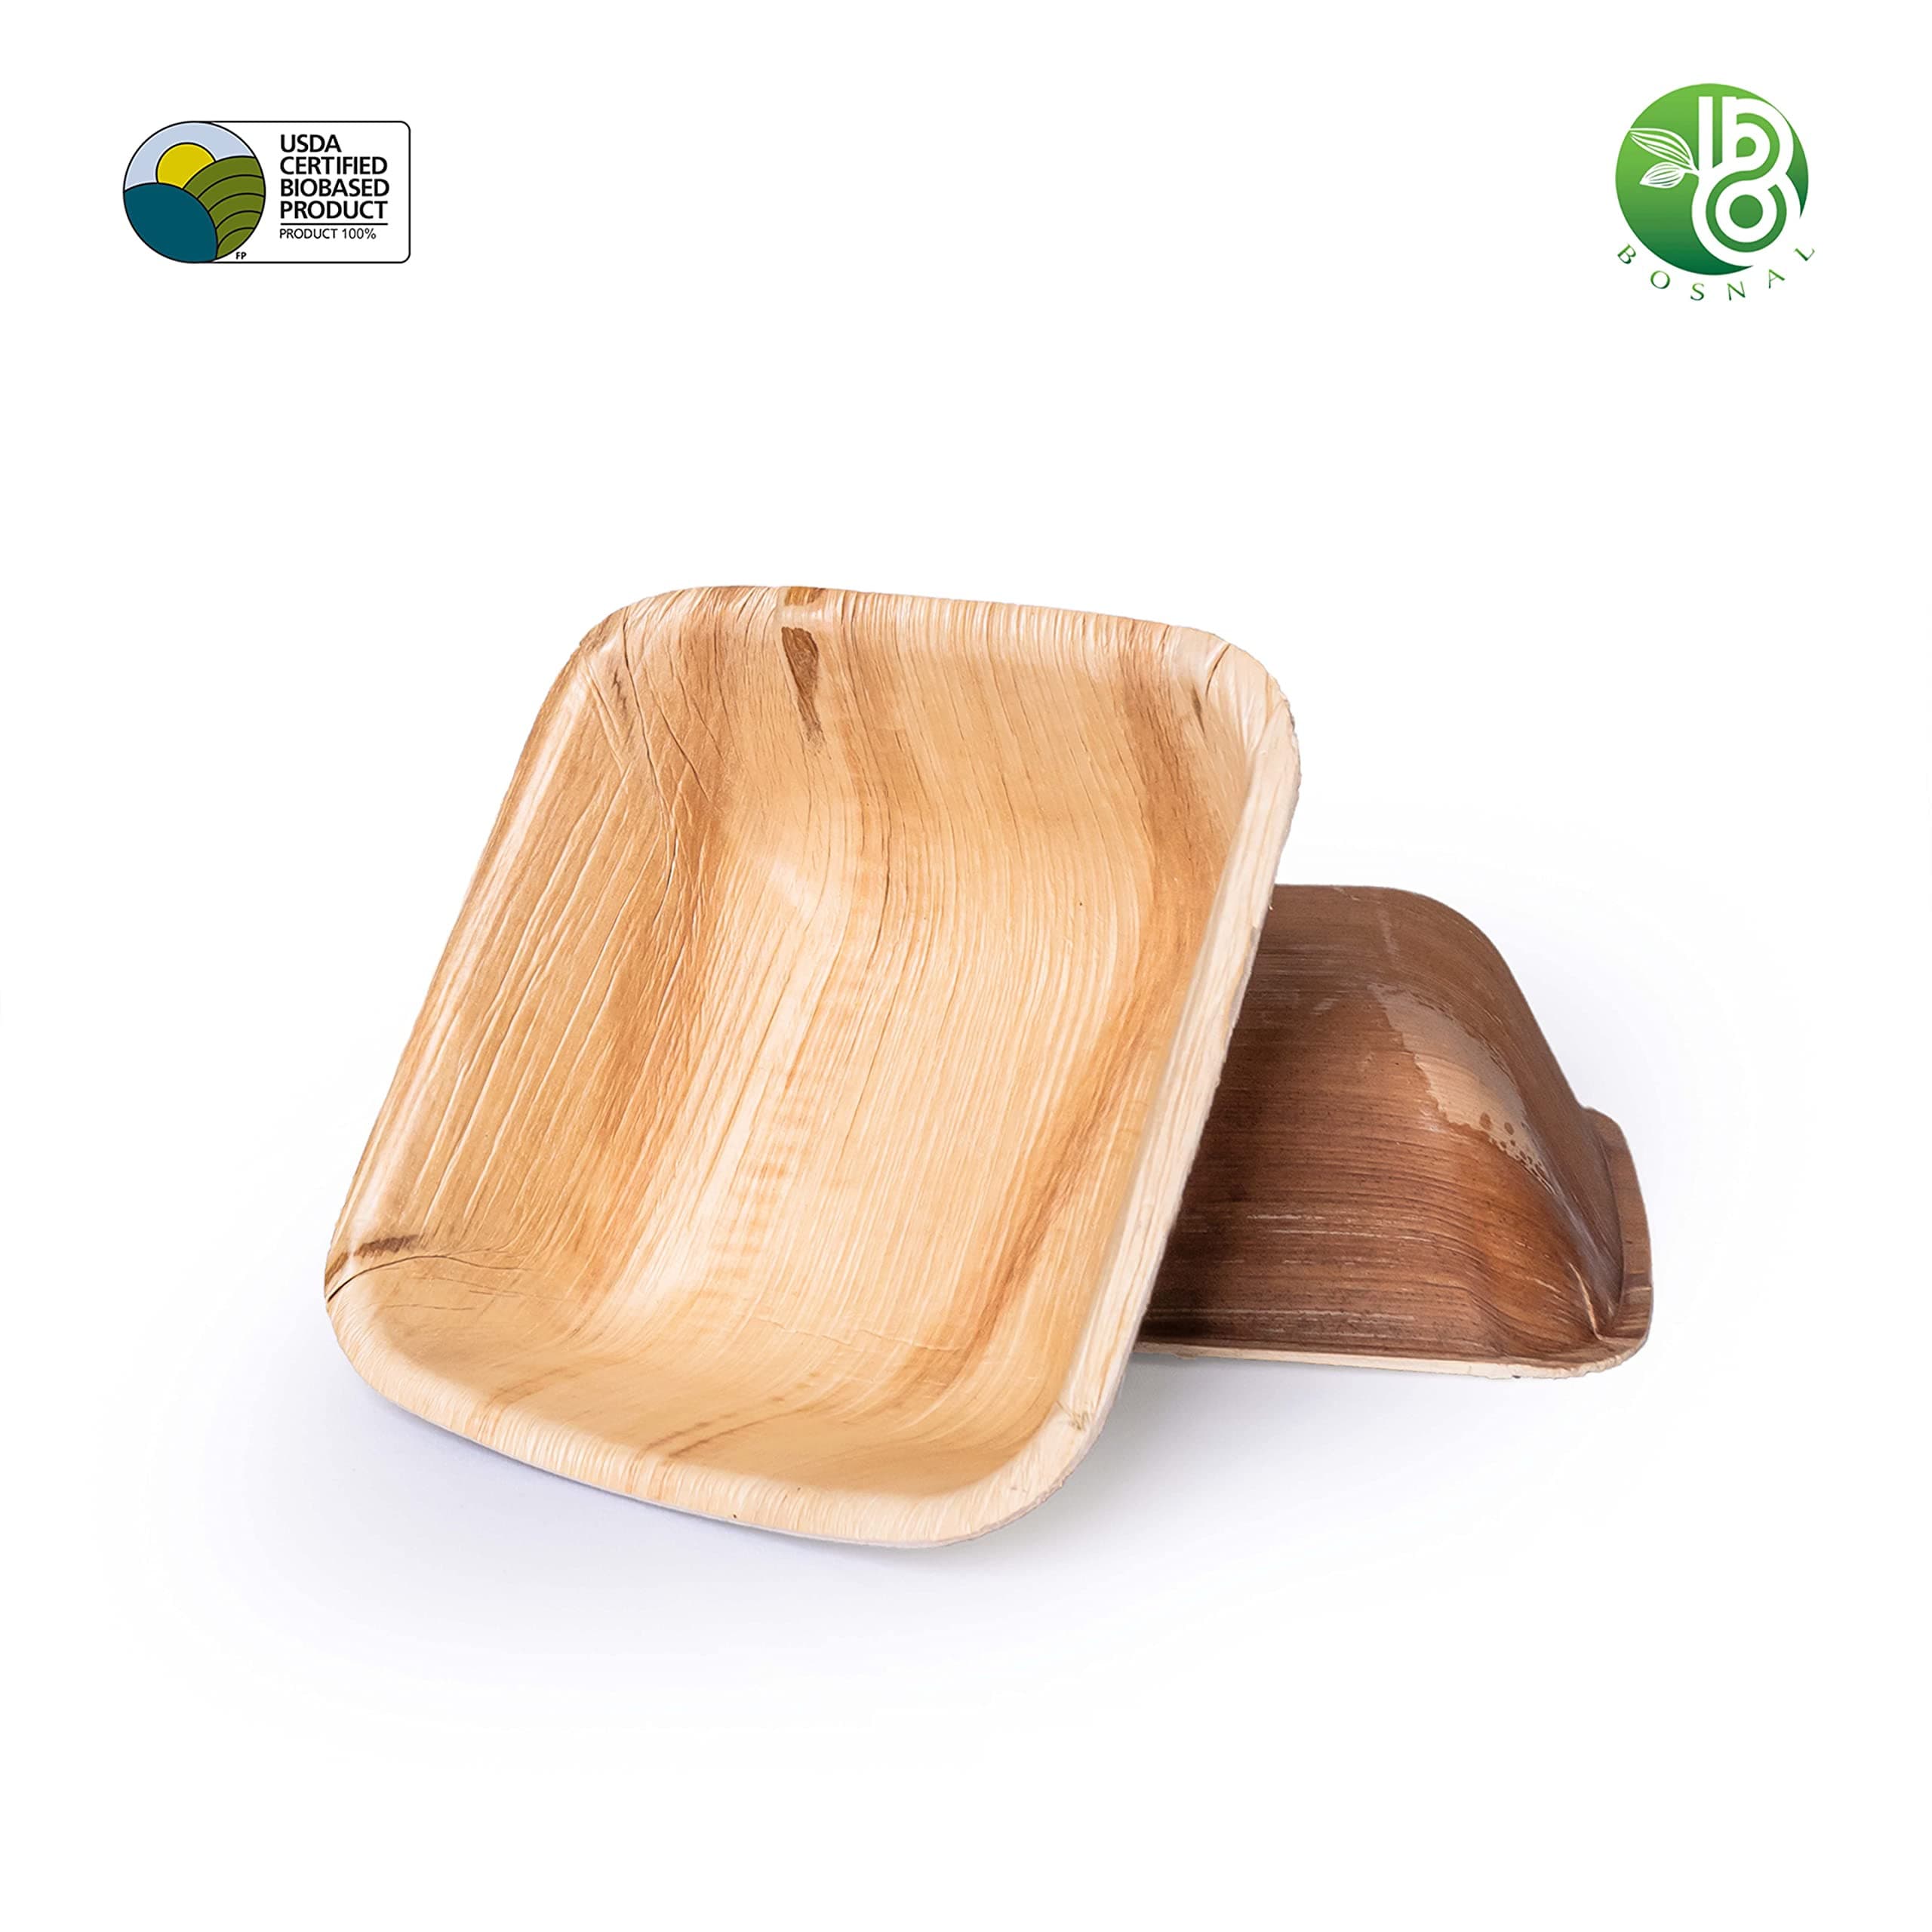 Bosnal 4 inch Square Plates, Compostable Palm Leaf, Bamboo and Wood Style, Stackable, Restaurant Grade, 25 Pcs - 9 Round Plate